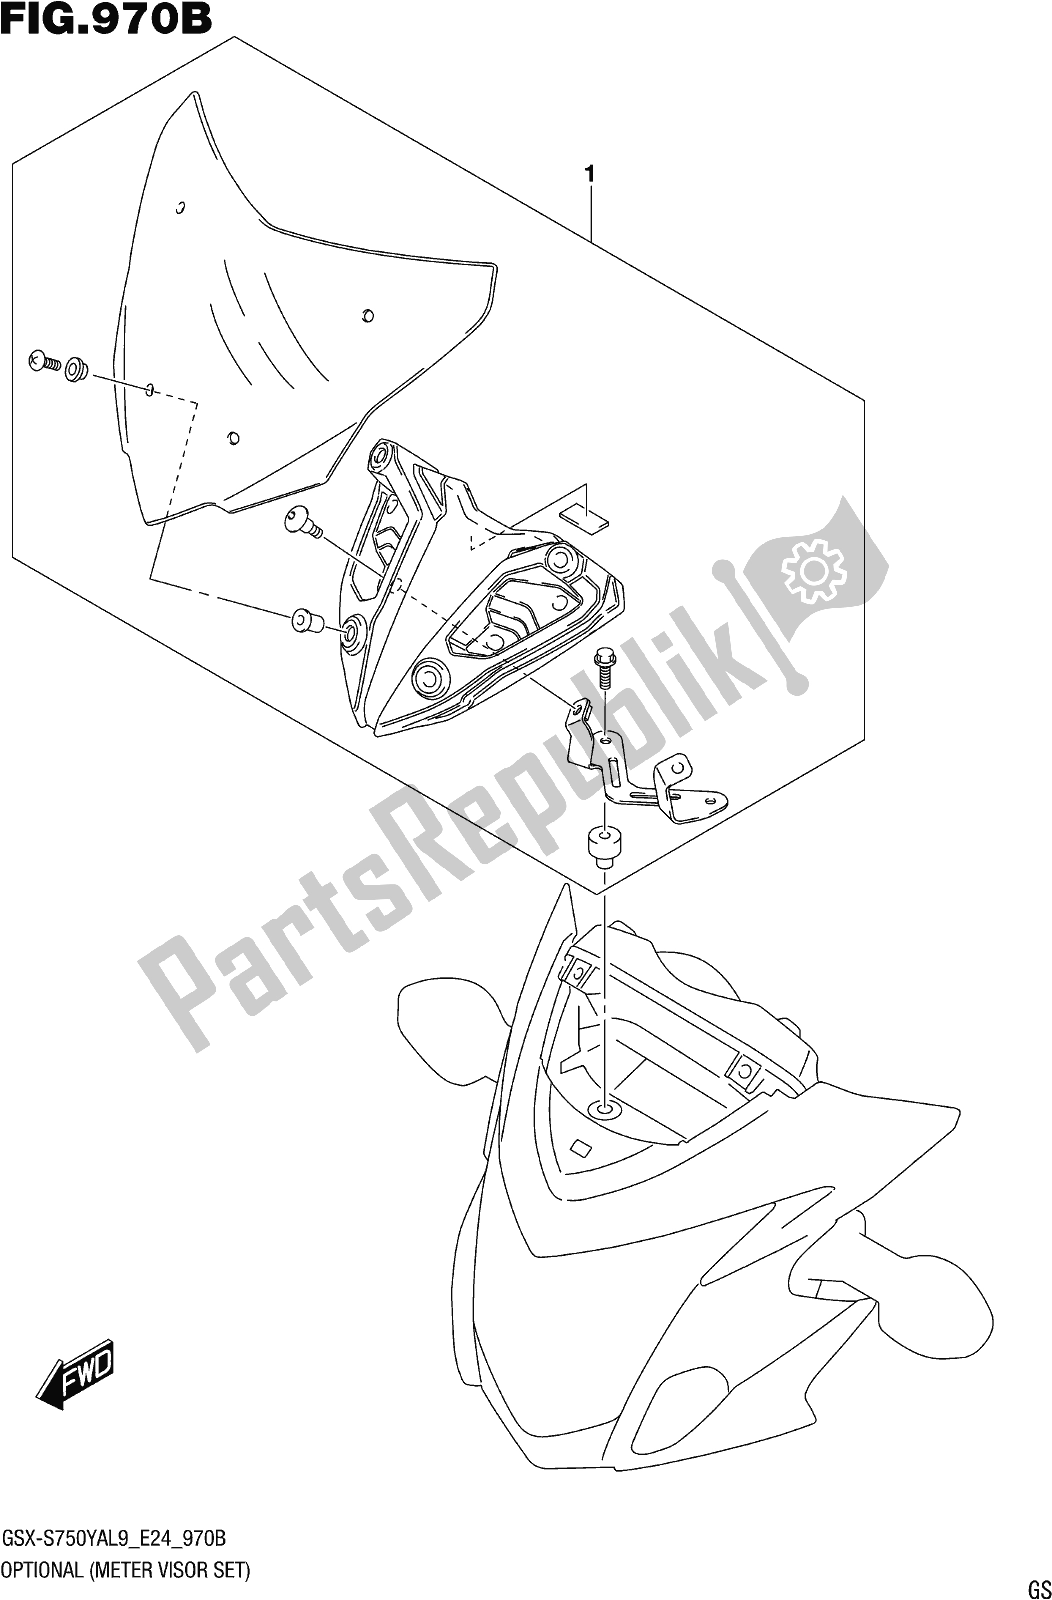 All parts for the Fig. 970b Optional (meter Visor Set) of the Suzuki Gsx-s 750 ZA 2019